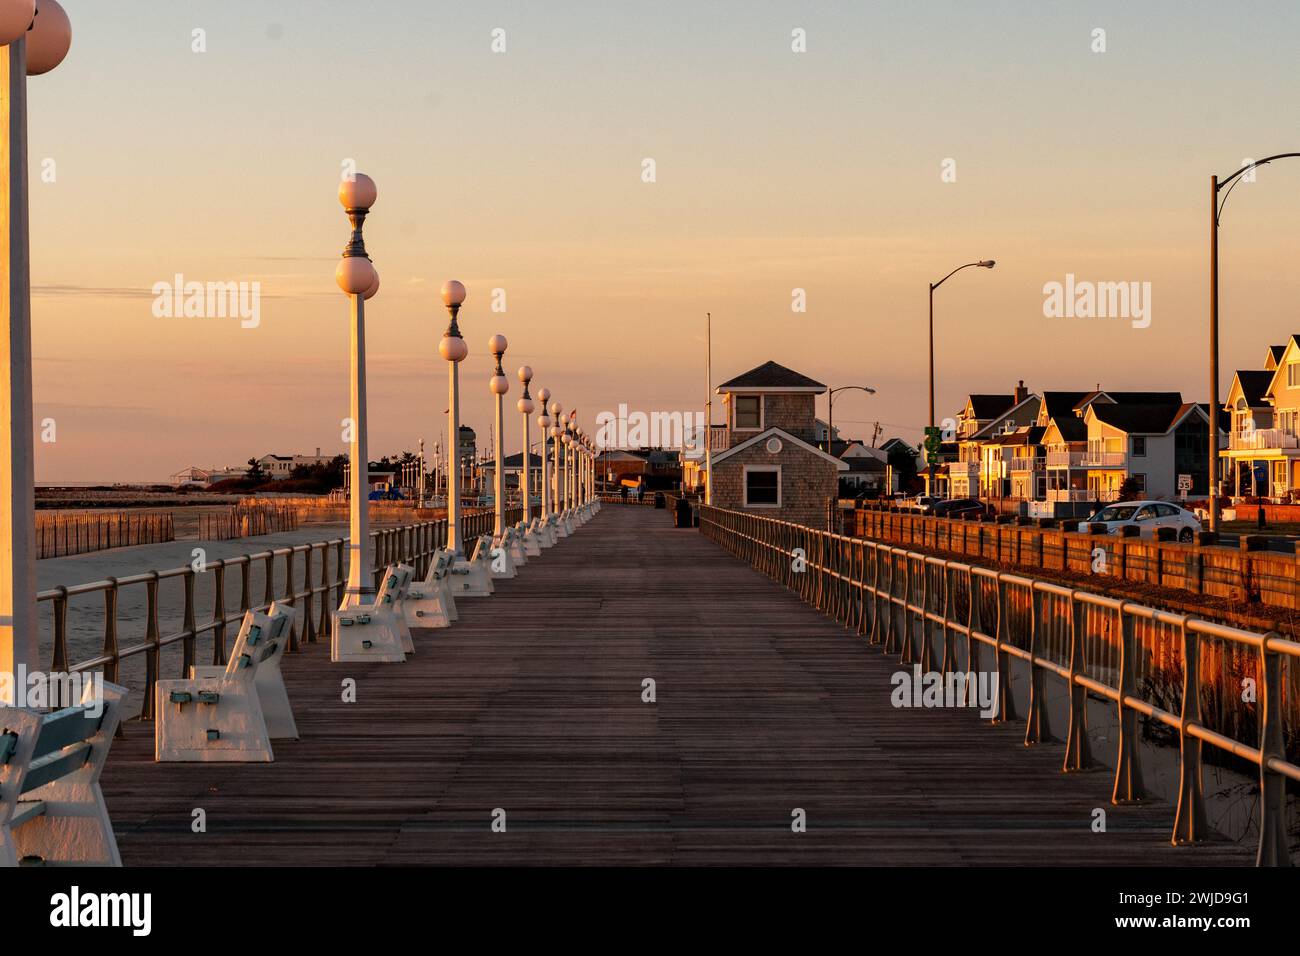 Avon By the Sea, New Jersey, USA - Golden hour sunrise on the boardwalk Stock Photo